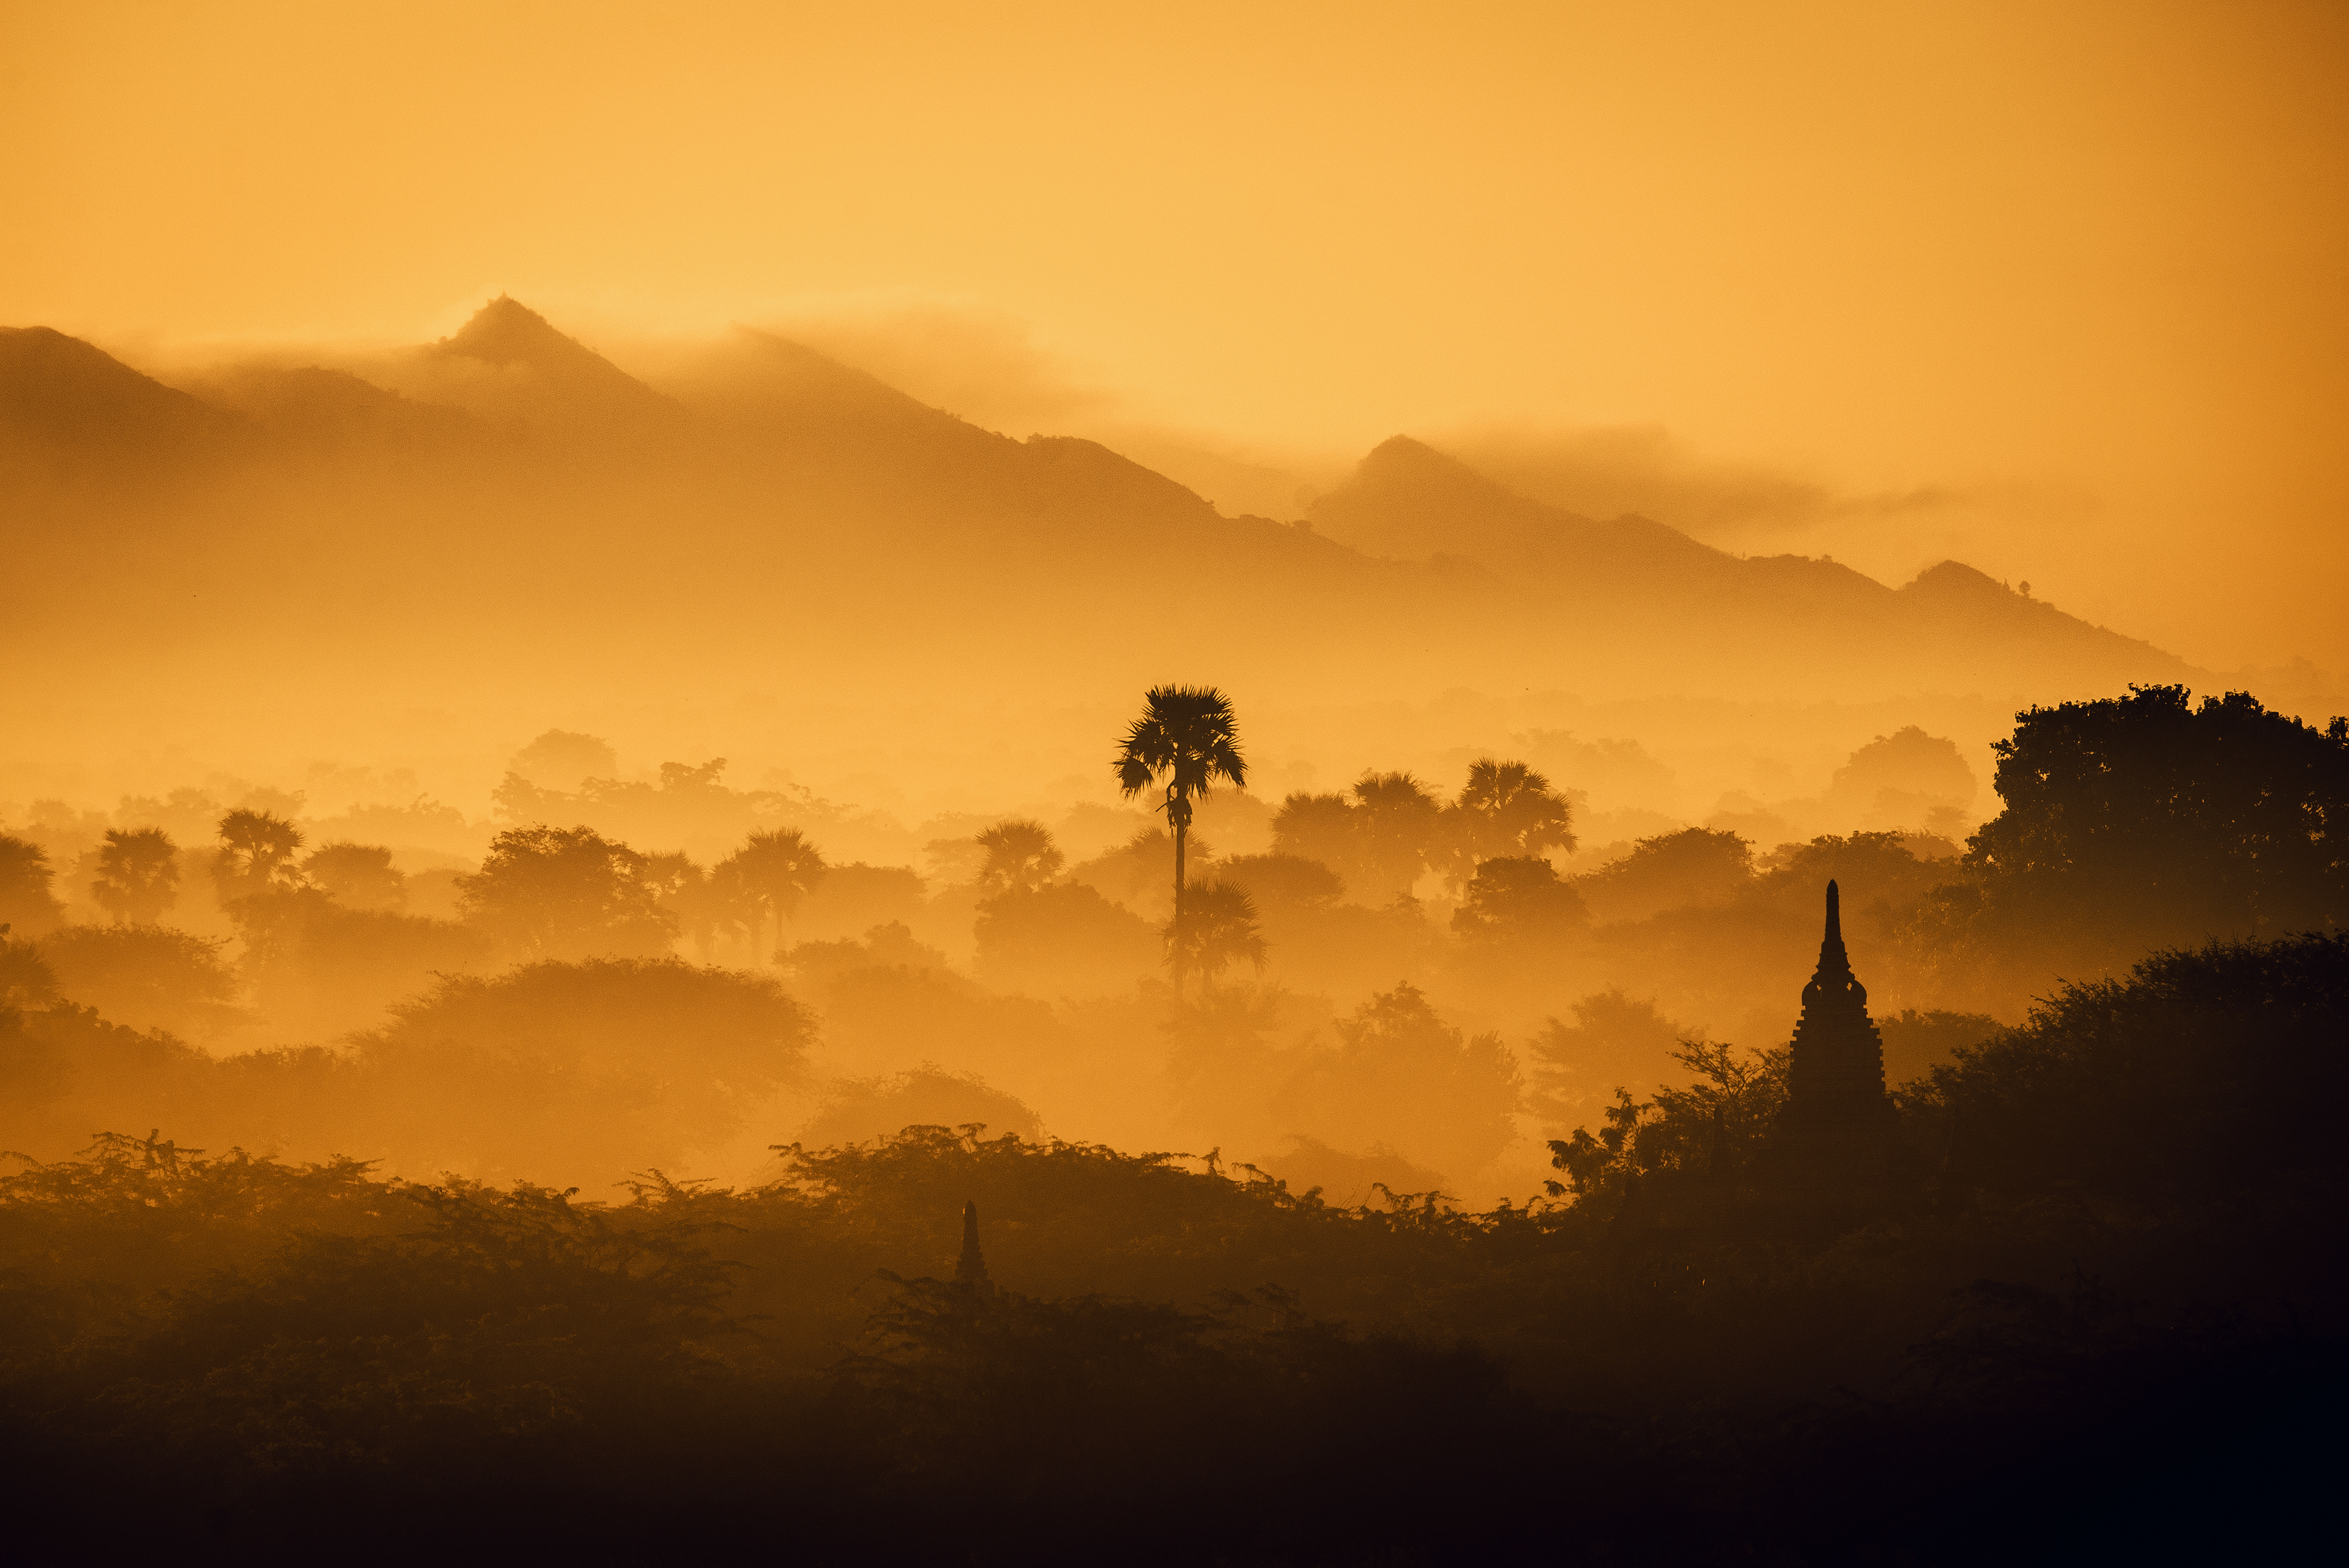 Myanmar Forest 4K Sunset Wallpaper, Hd Nature 4K Wallpapers, Images And